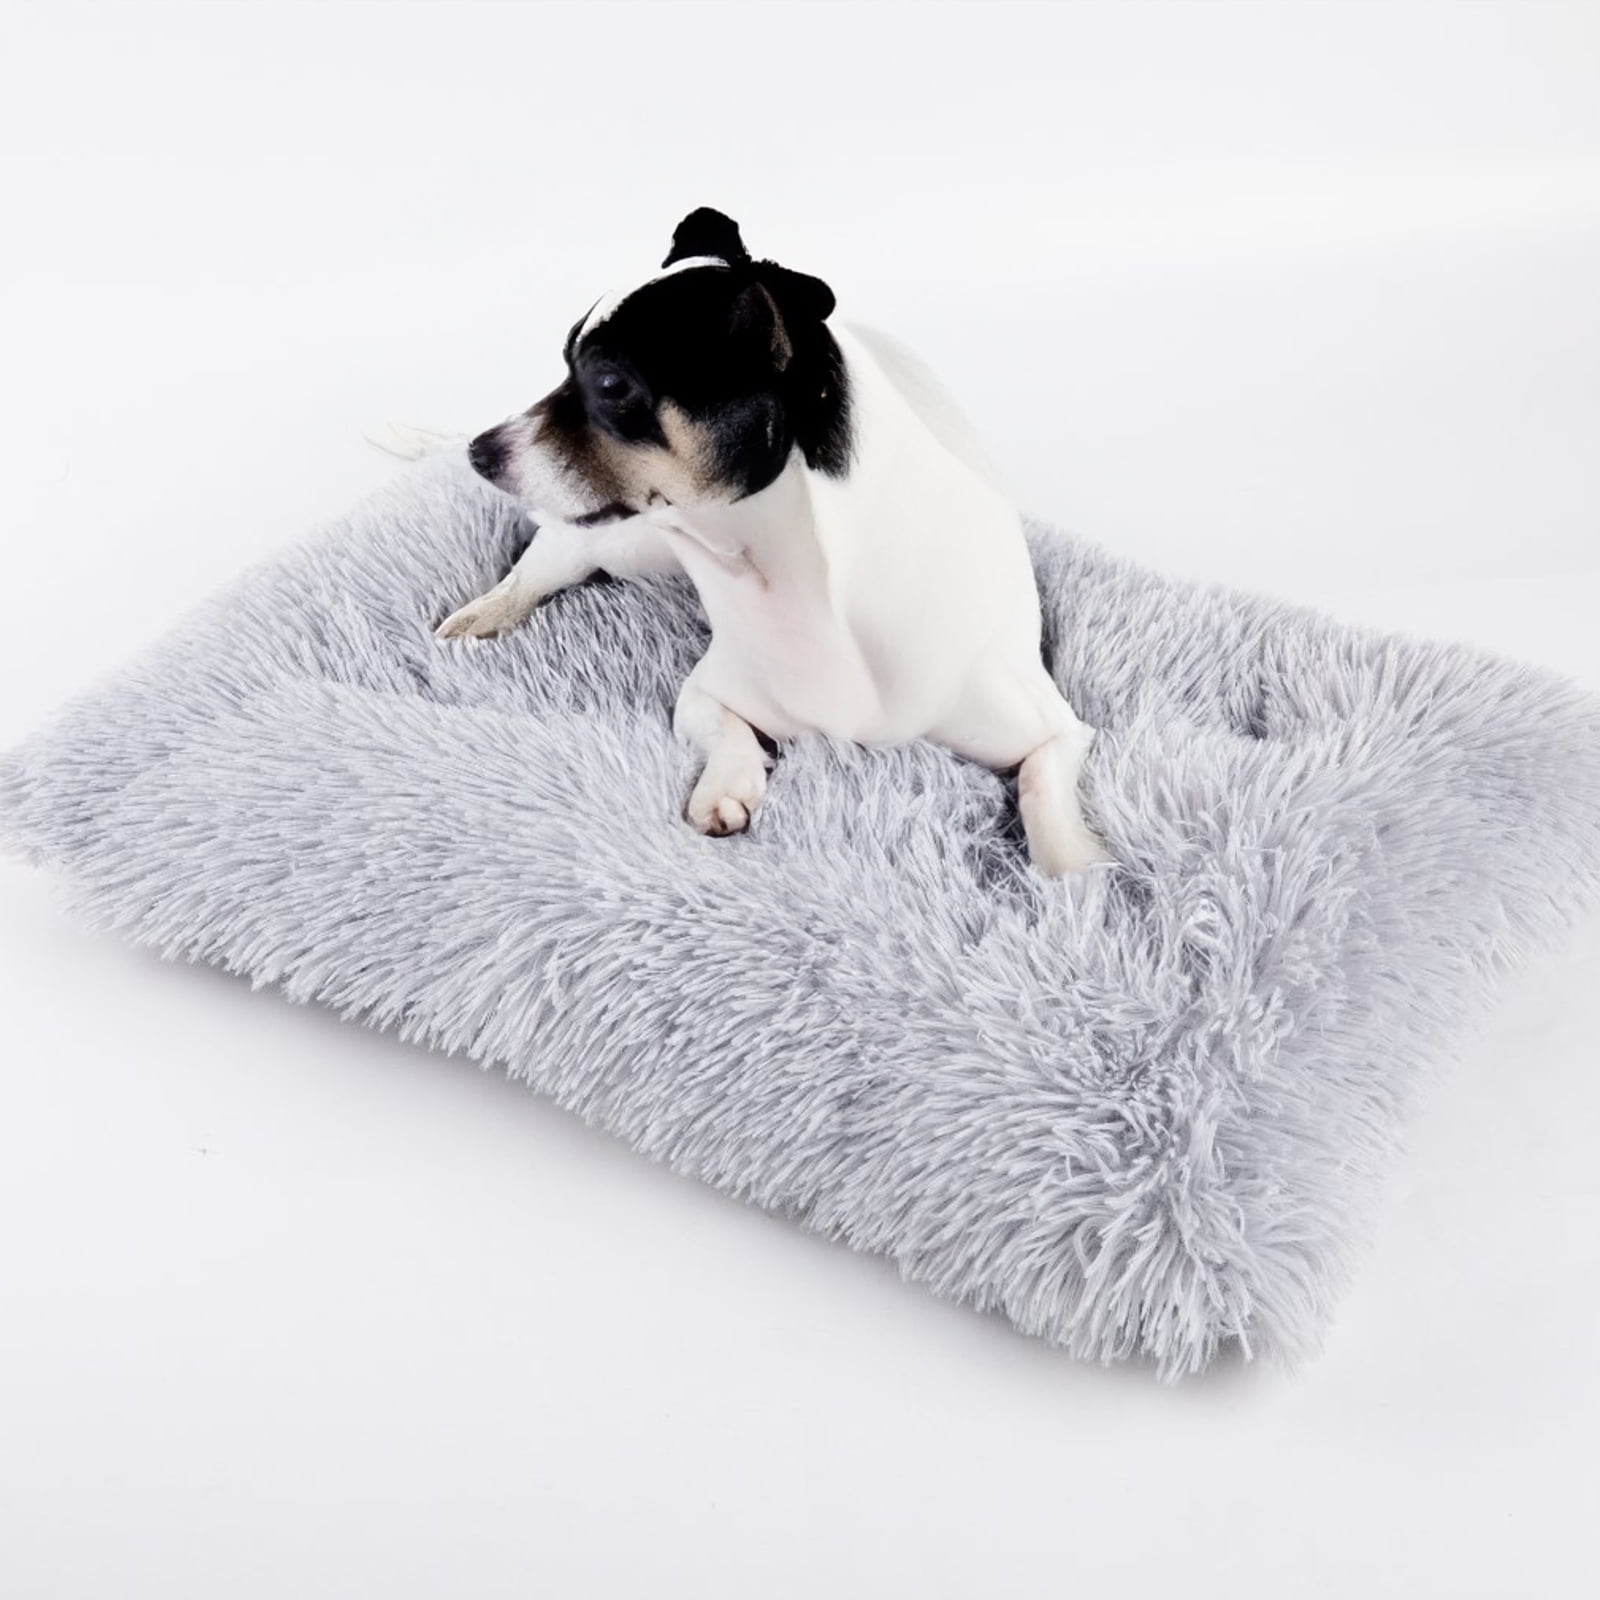 1pc Soft Dog Crate Mat, Washable Dog Rug, Fleece Fluffy Pet Rug, Dog Bed  Pet Sleeping Mattress (Size: 23.6 X 35.4 Inches, 23.6 X 14.7 Inches)